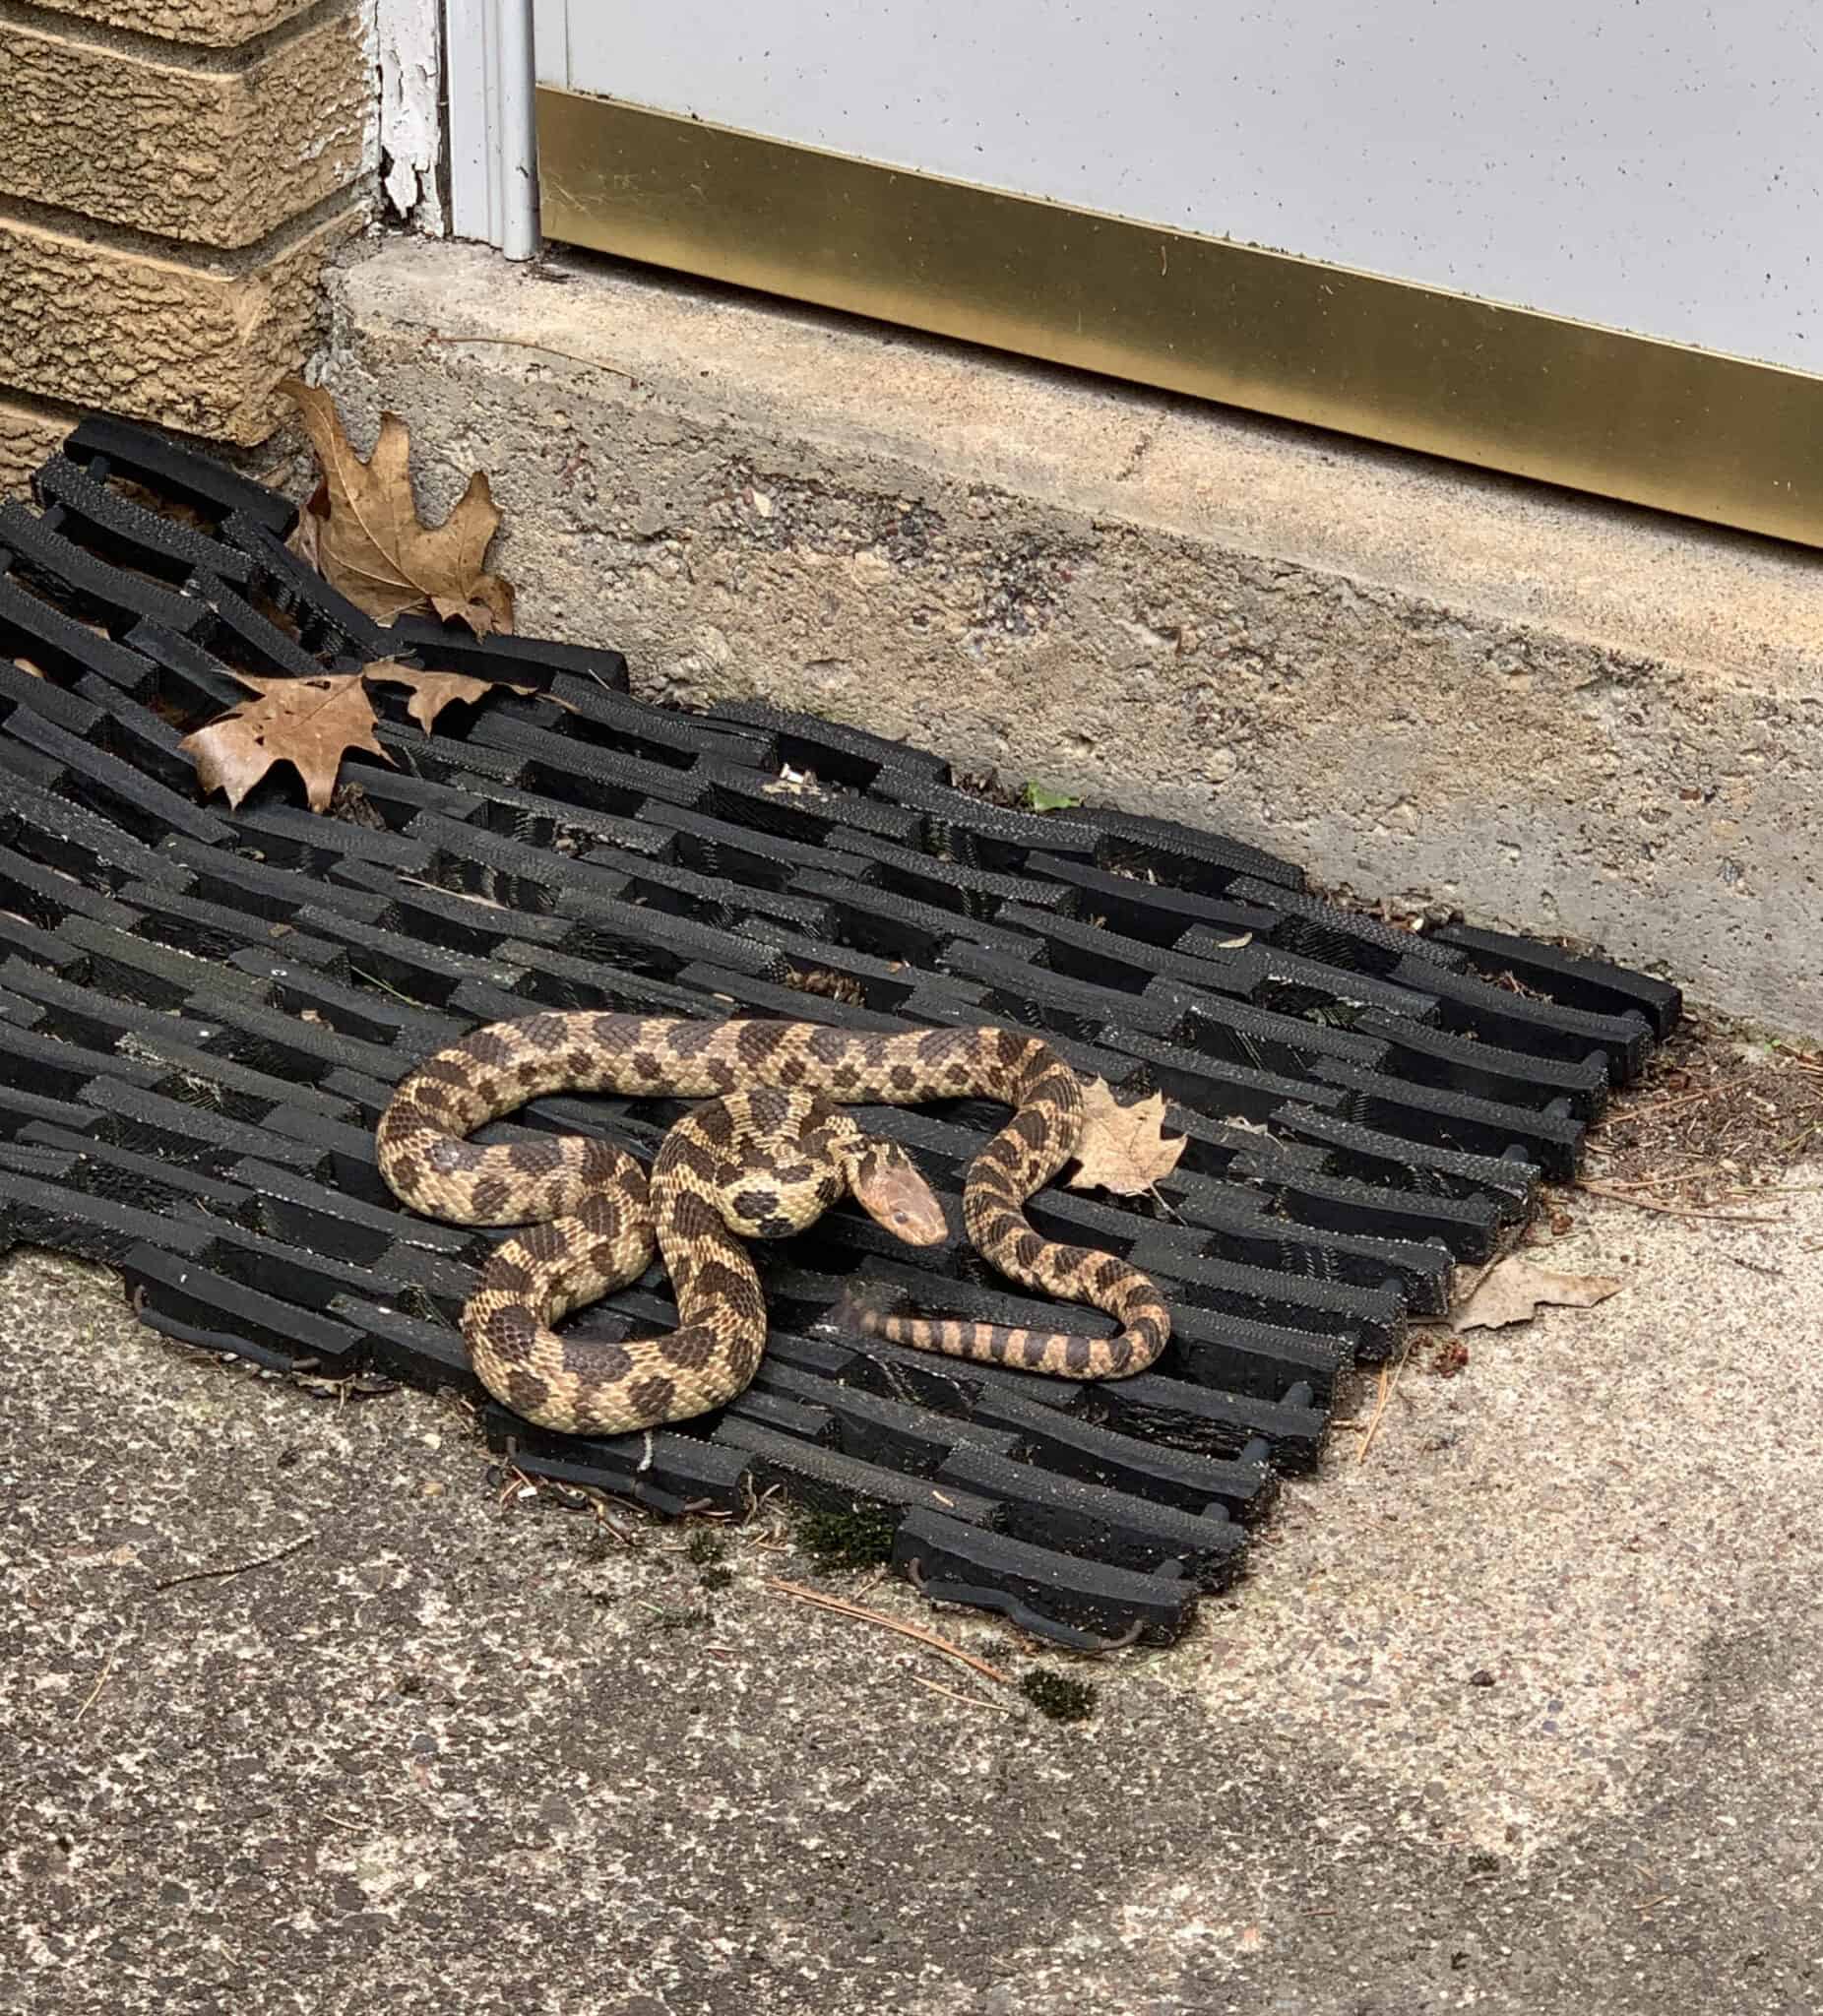 Mystery solved: DNR identifies snake spotted in Tomahawk